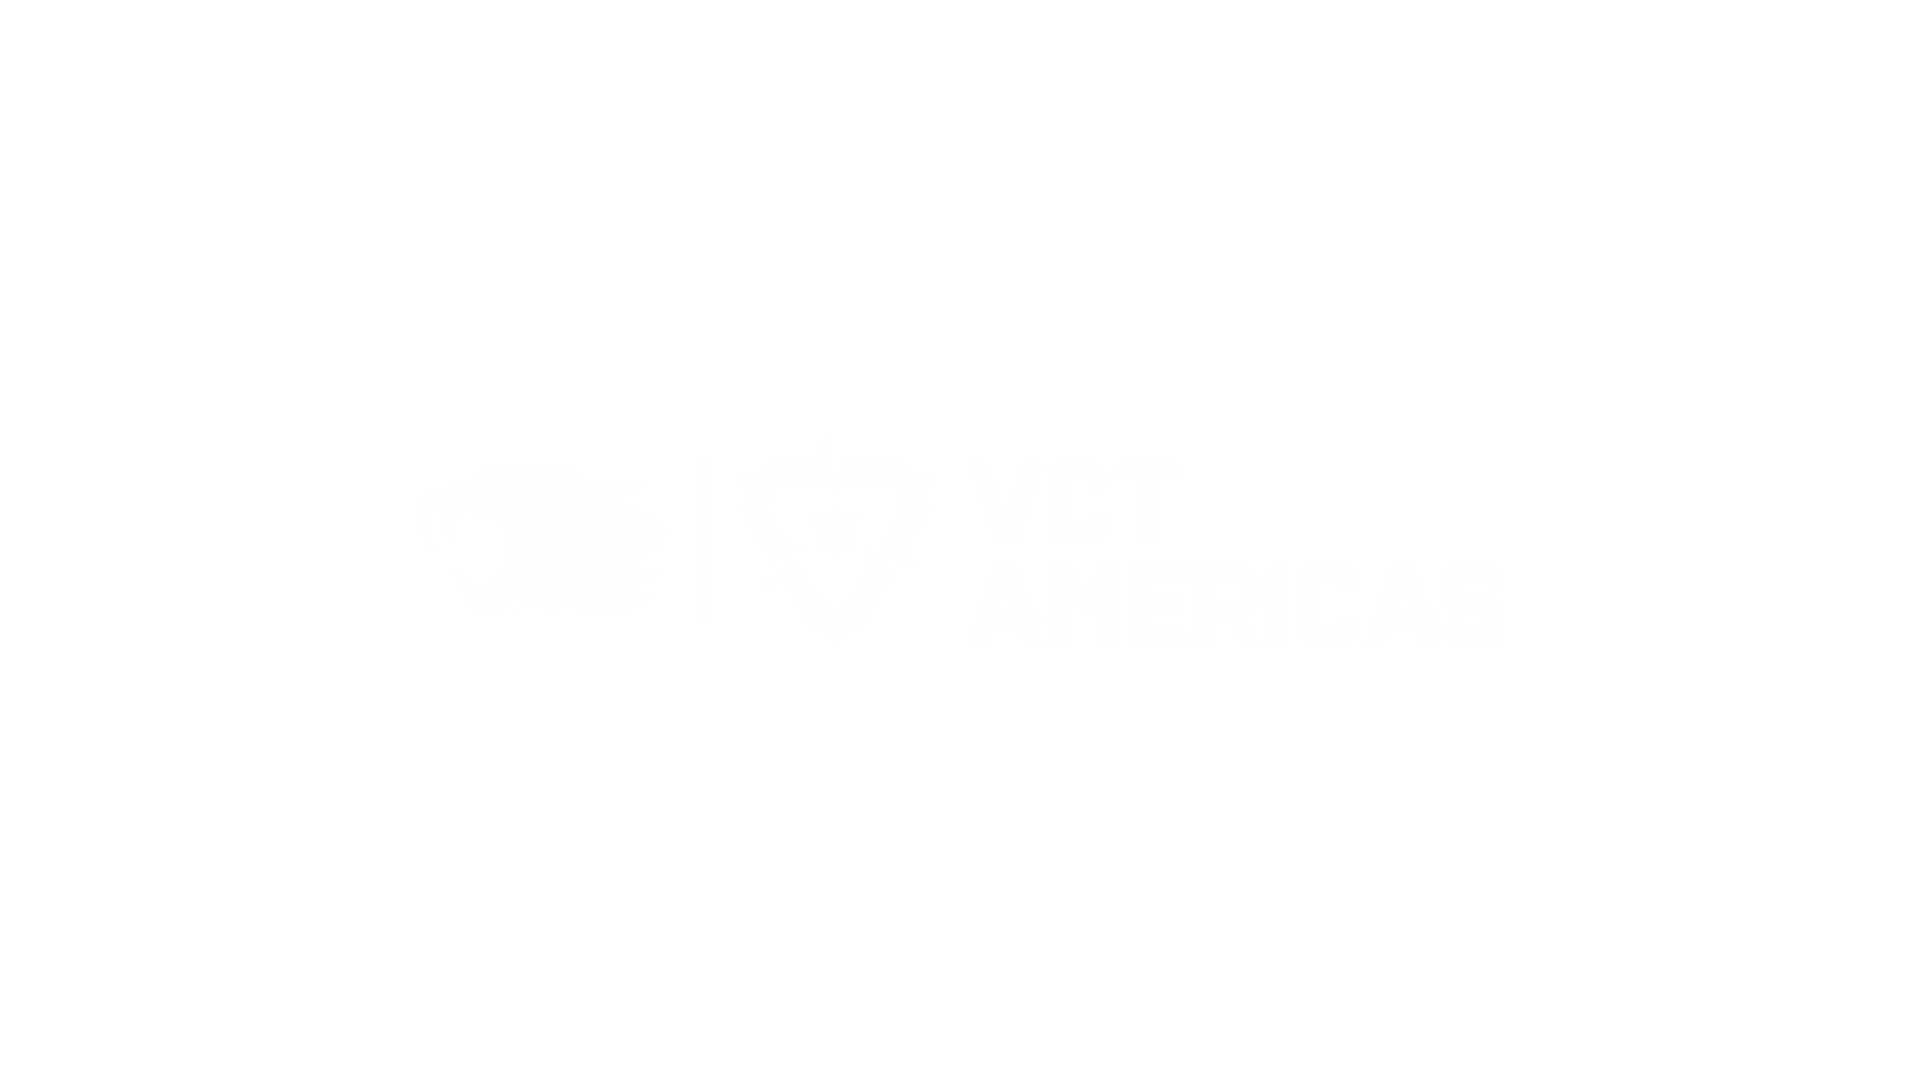 VCT Americas and iBUYPOWER logos